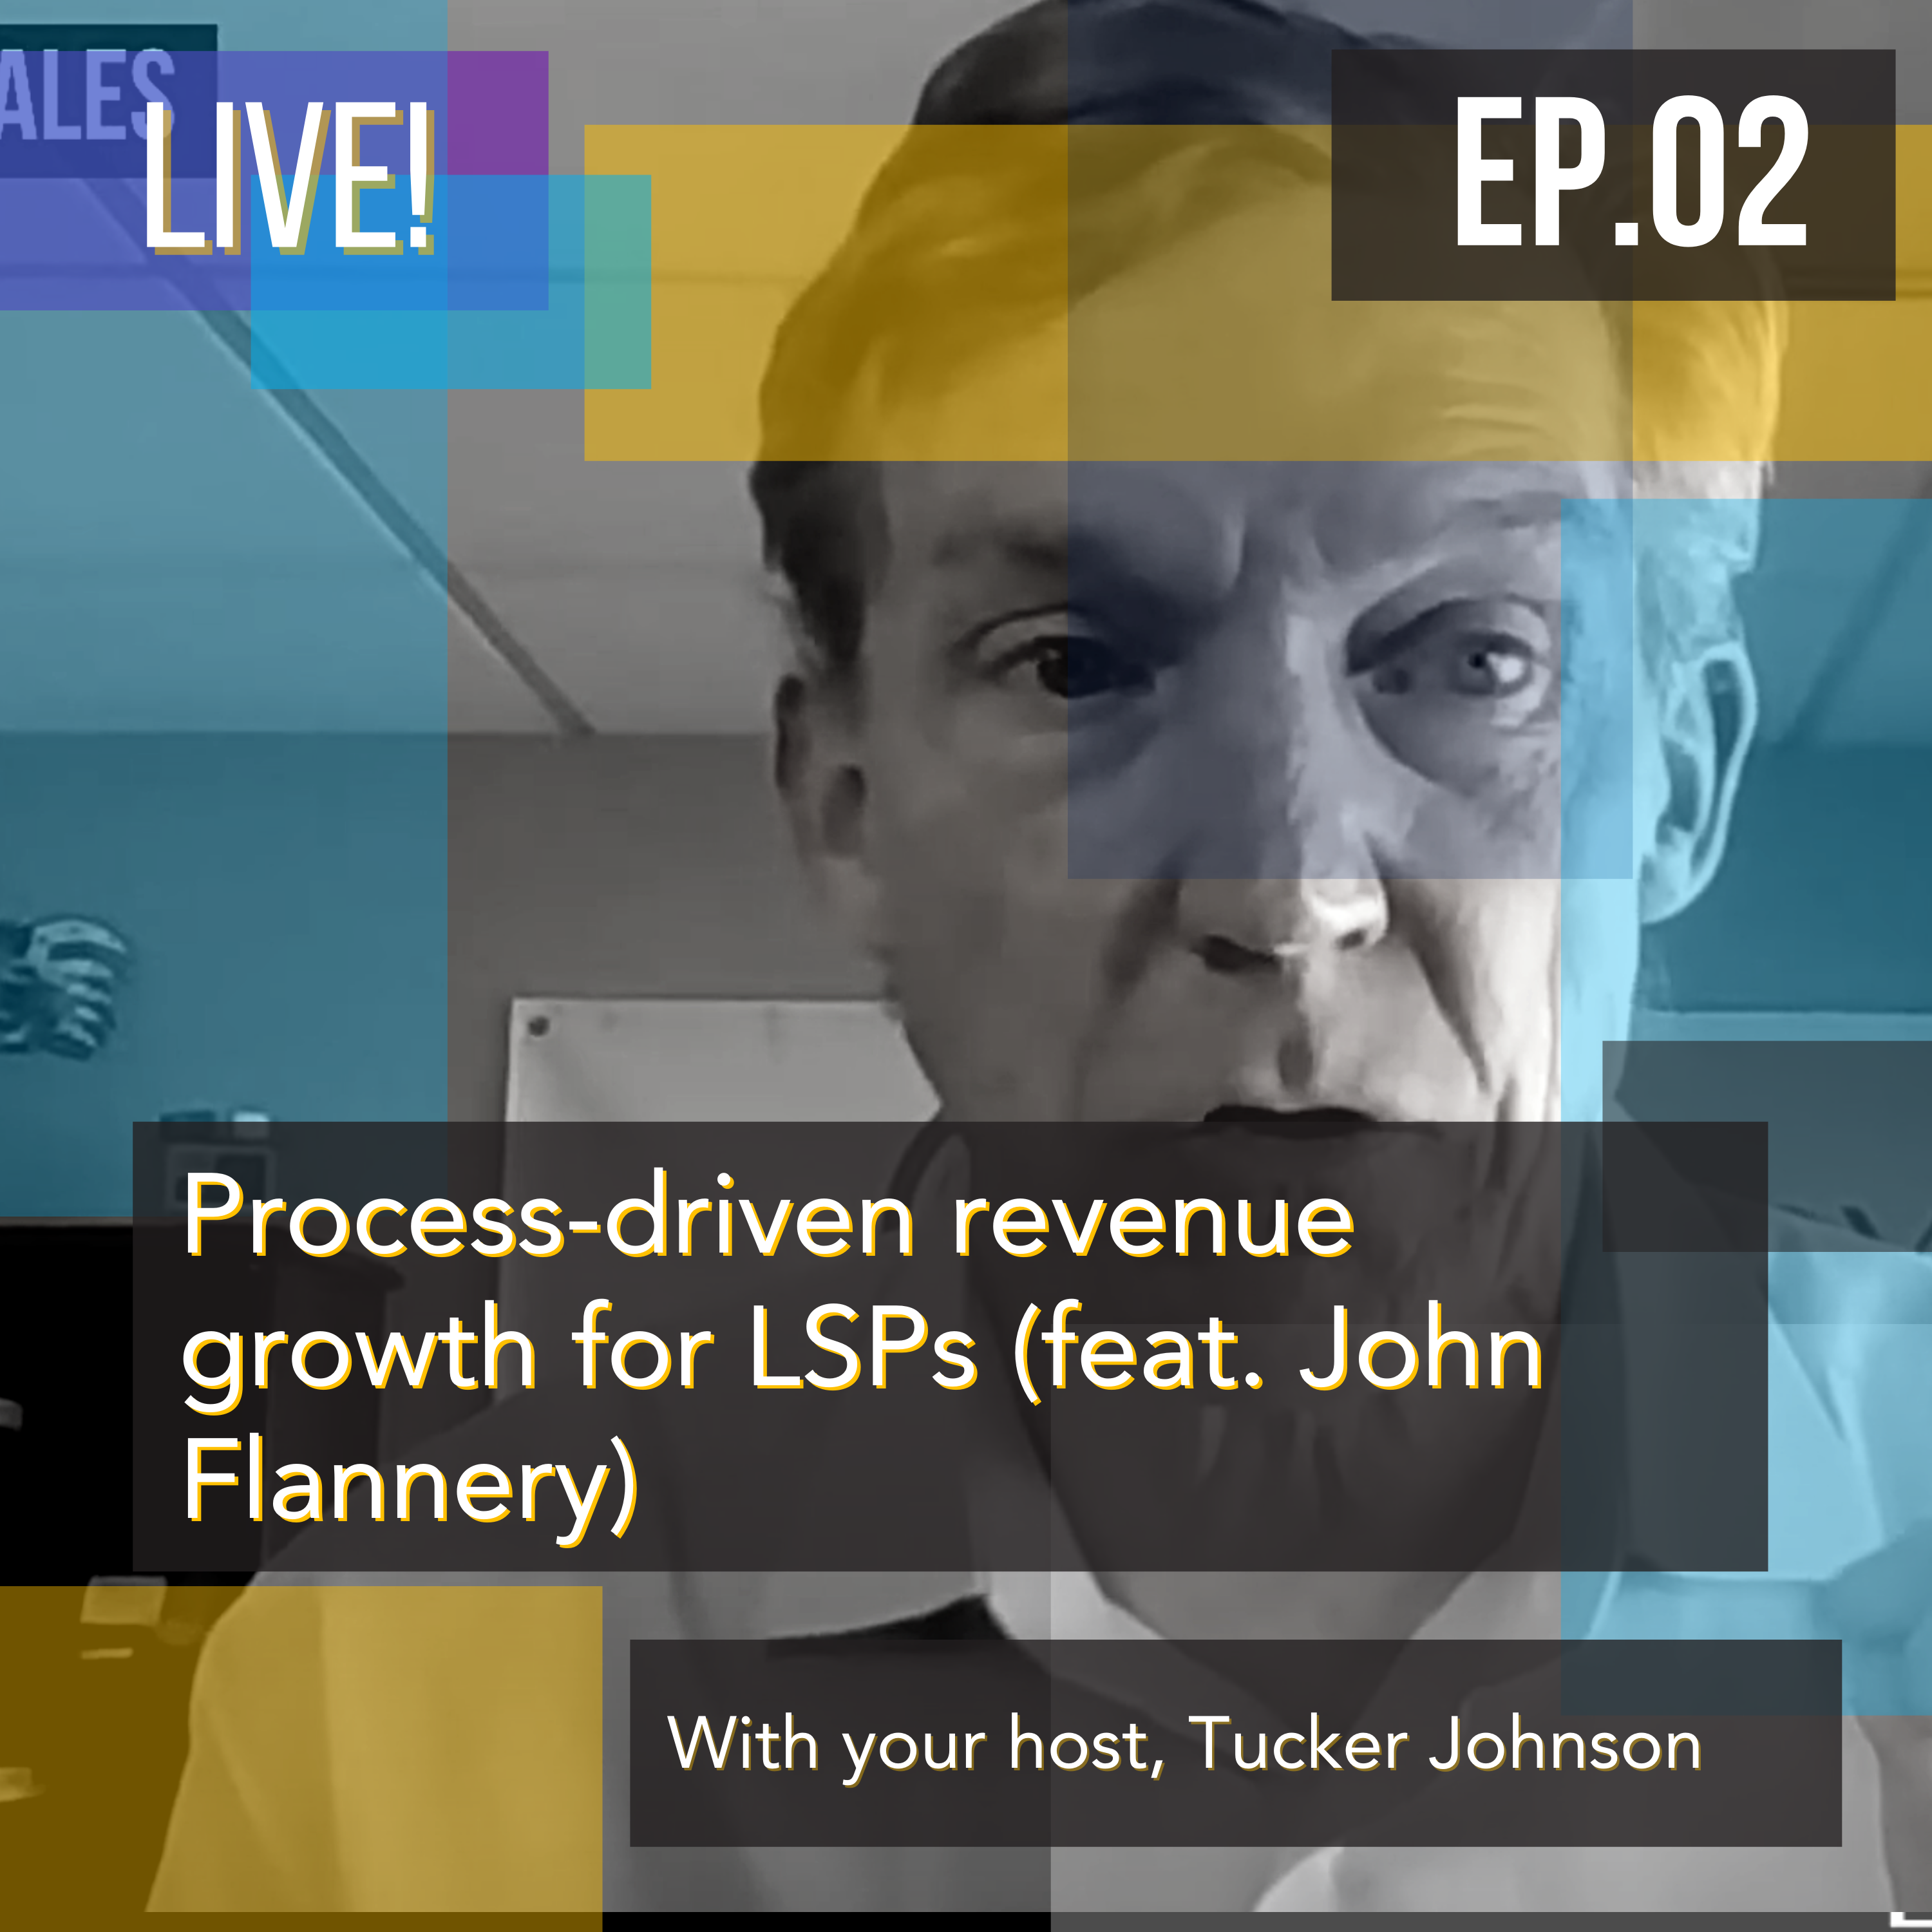 Process-driven revenue growth for LSPs (feat. John Flannery)